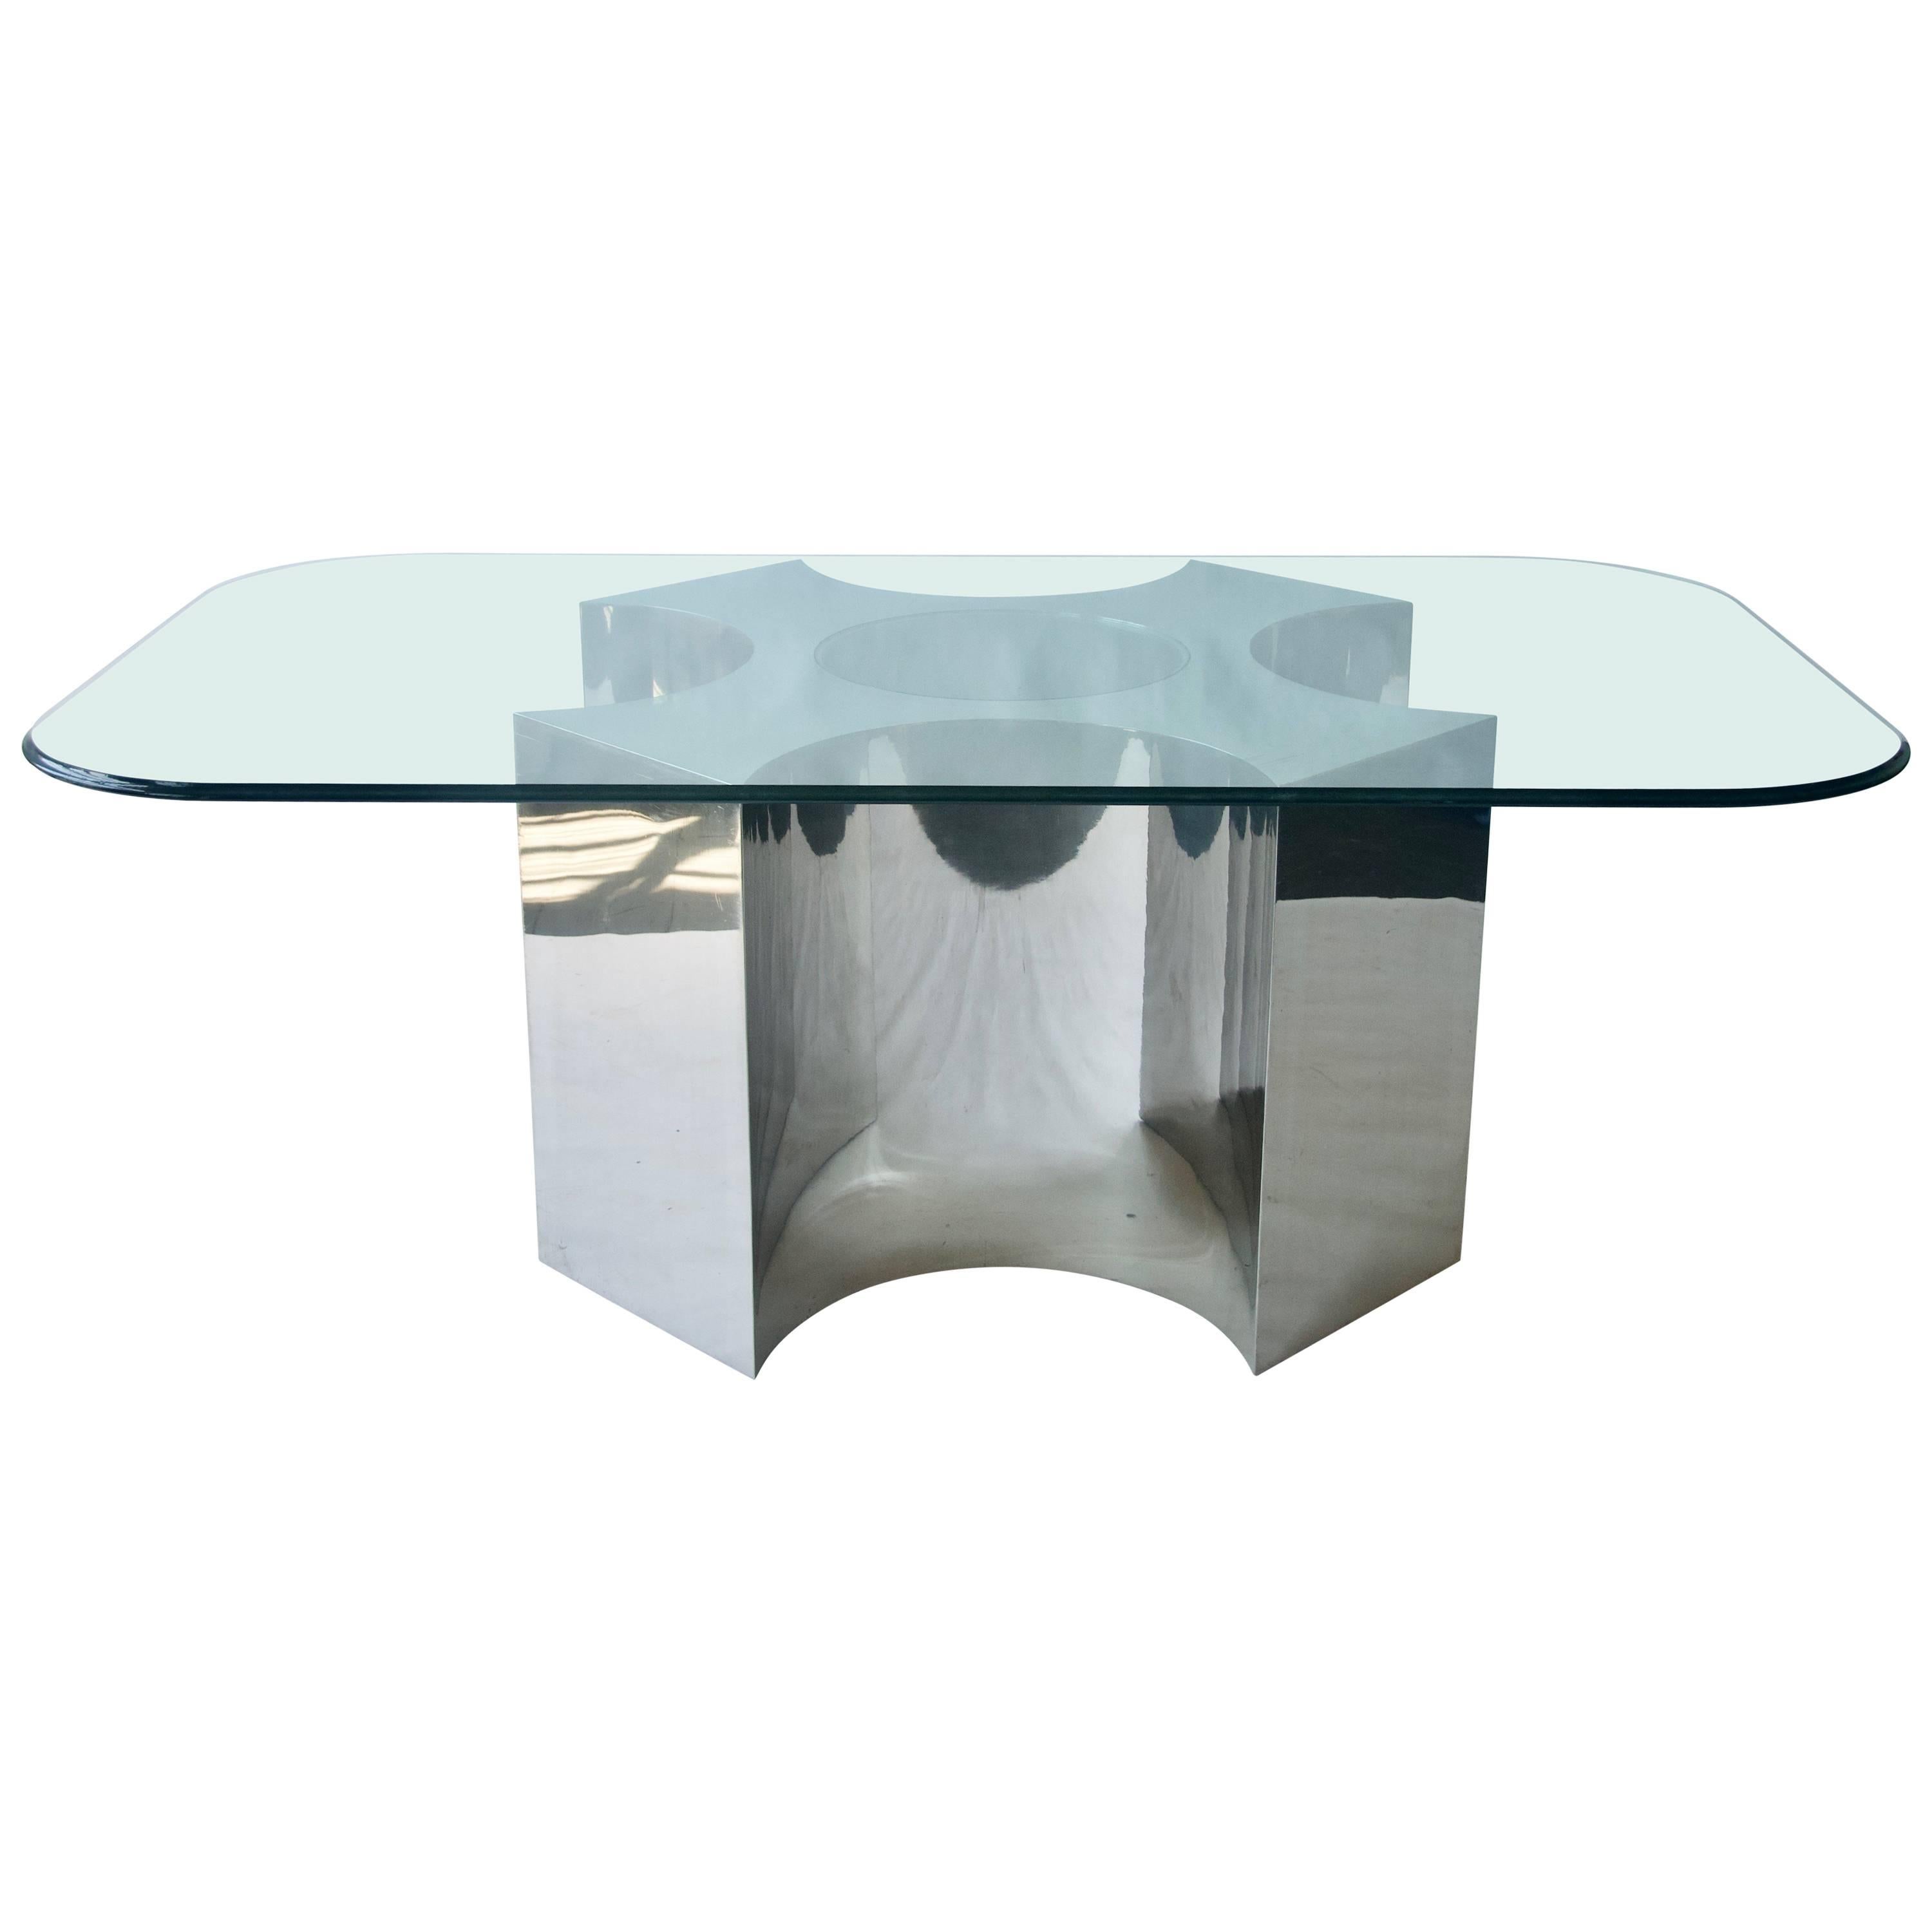 Large-Scale Polished Steel Dining Table For Sale